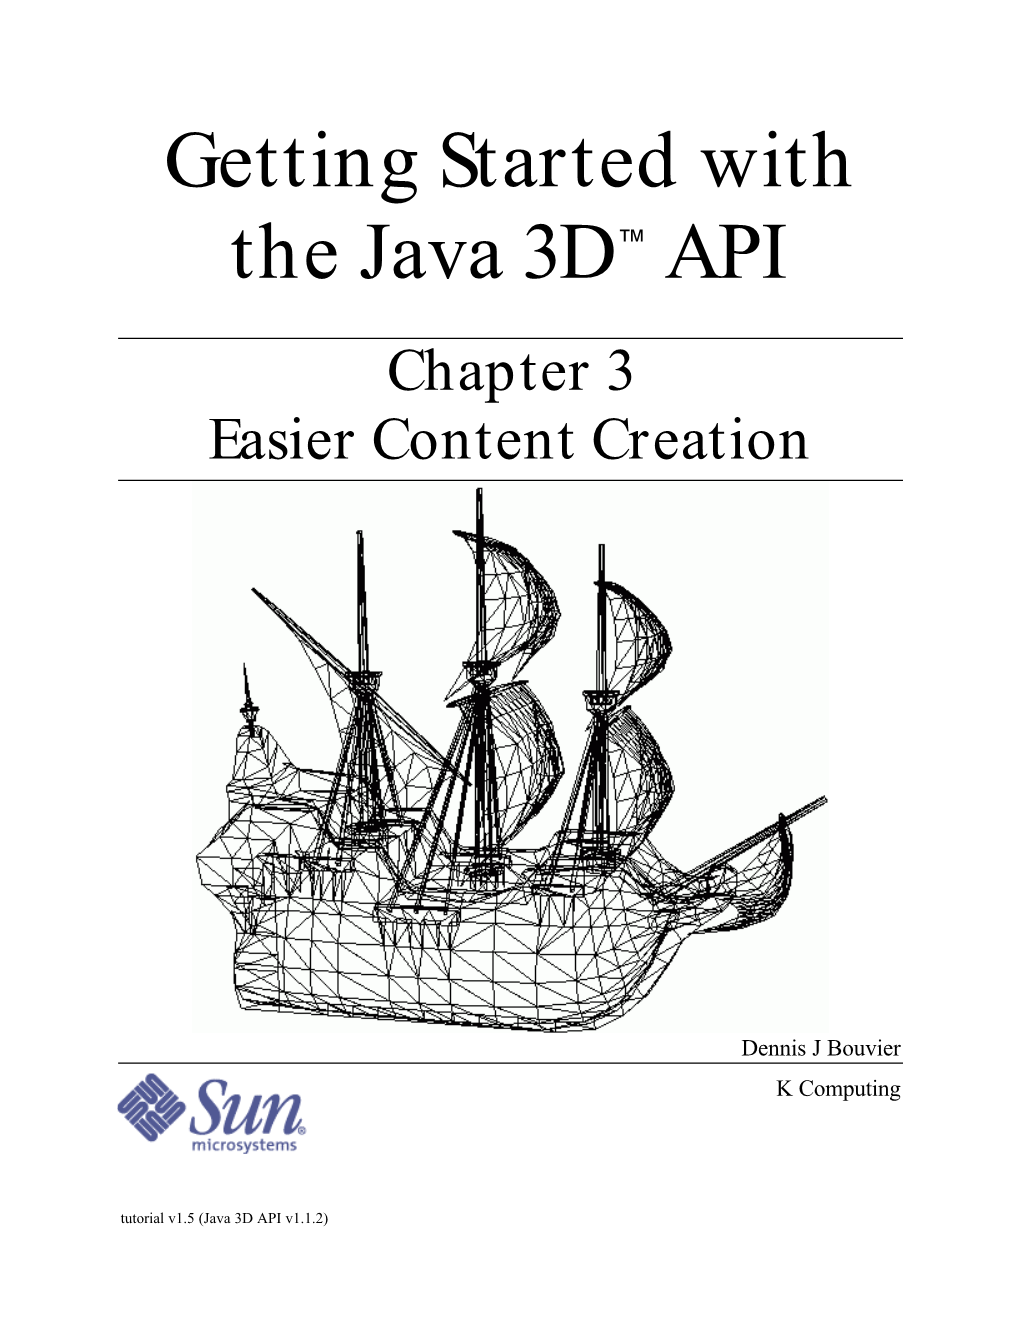 Getting Started with the Java 3D™ API Chapter 3 Easier Content Creation